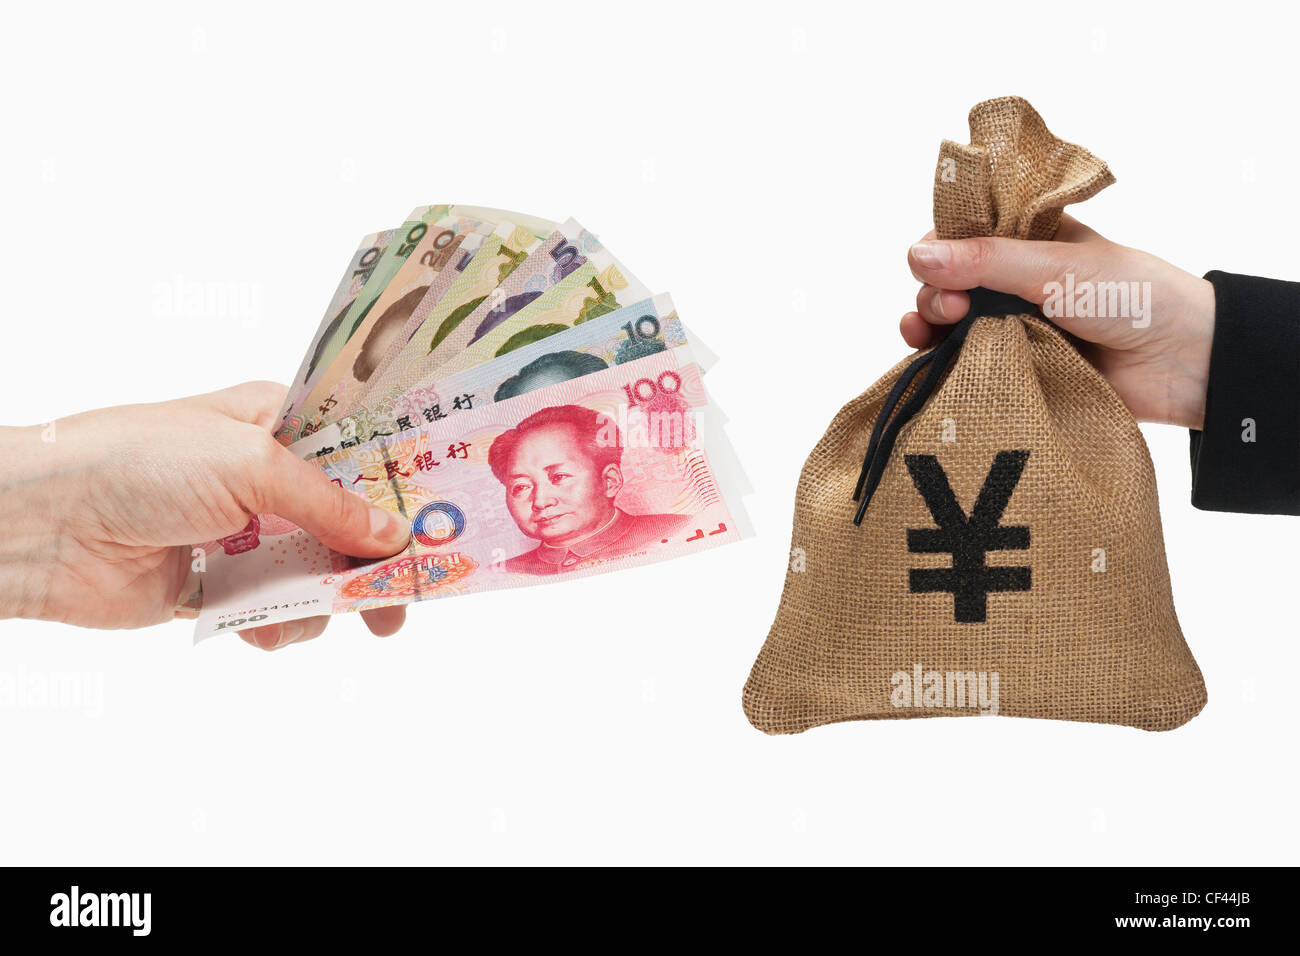 Diverse Chinese Yuan bills are held in the hand. At the other side a money bag with a Japanese Yen currency sign hand held. Stock Photo